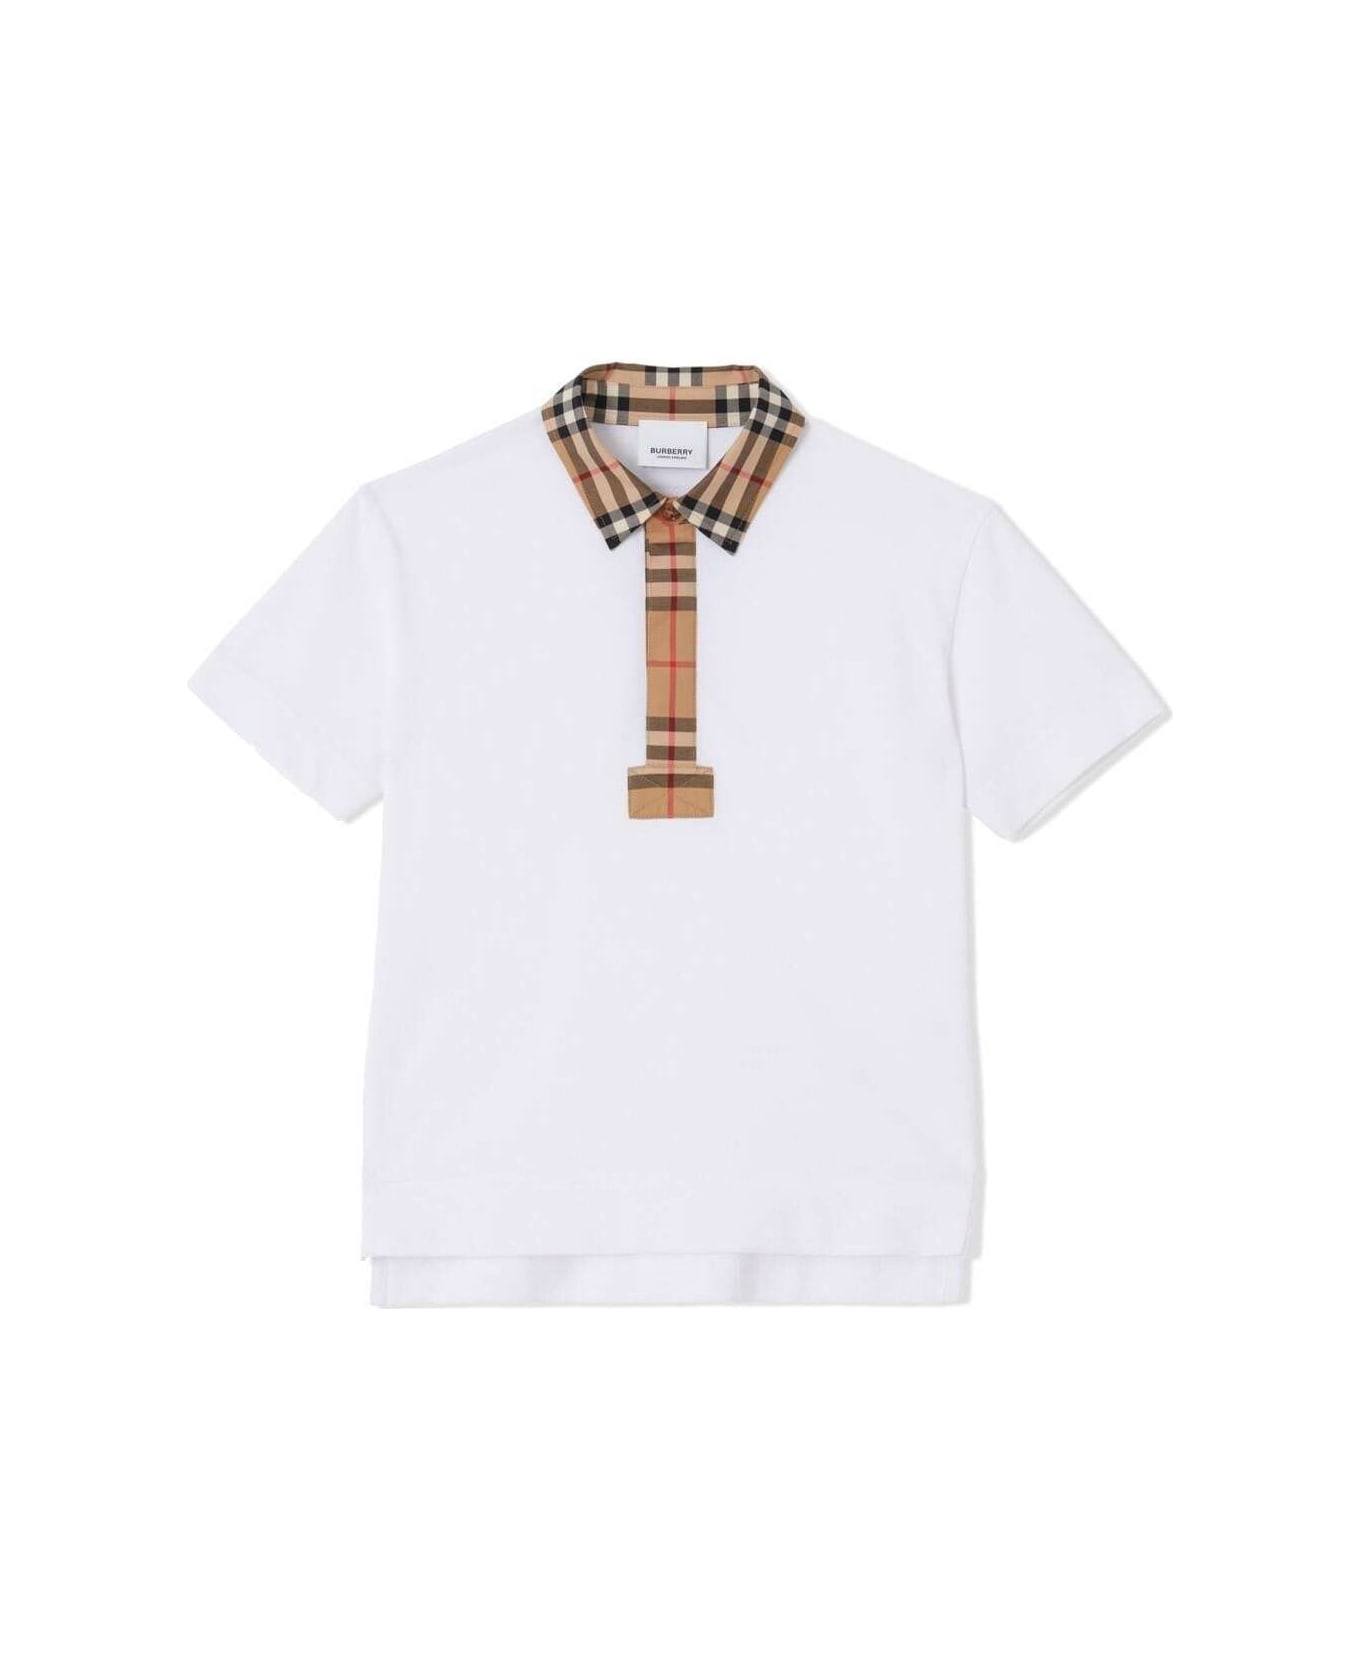 Burberry White Polo Shirts Shirt With Vintage Check Motif And Logo In Cotton Baby - White